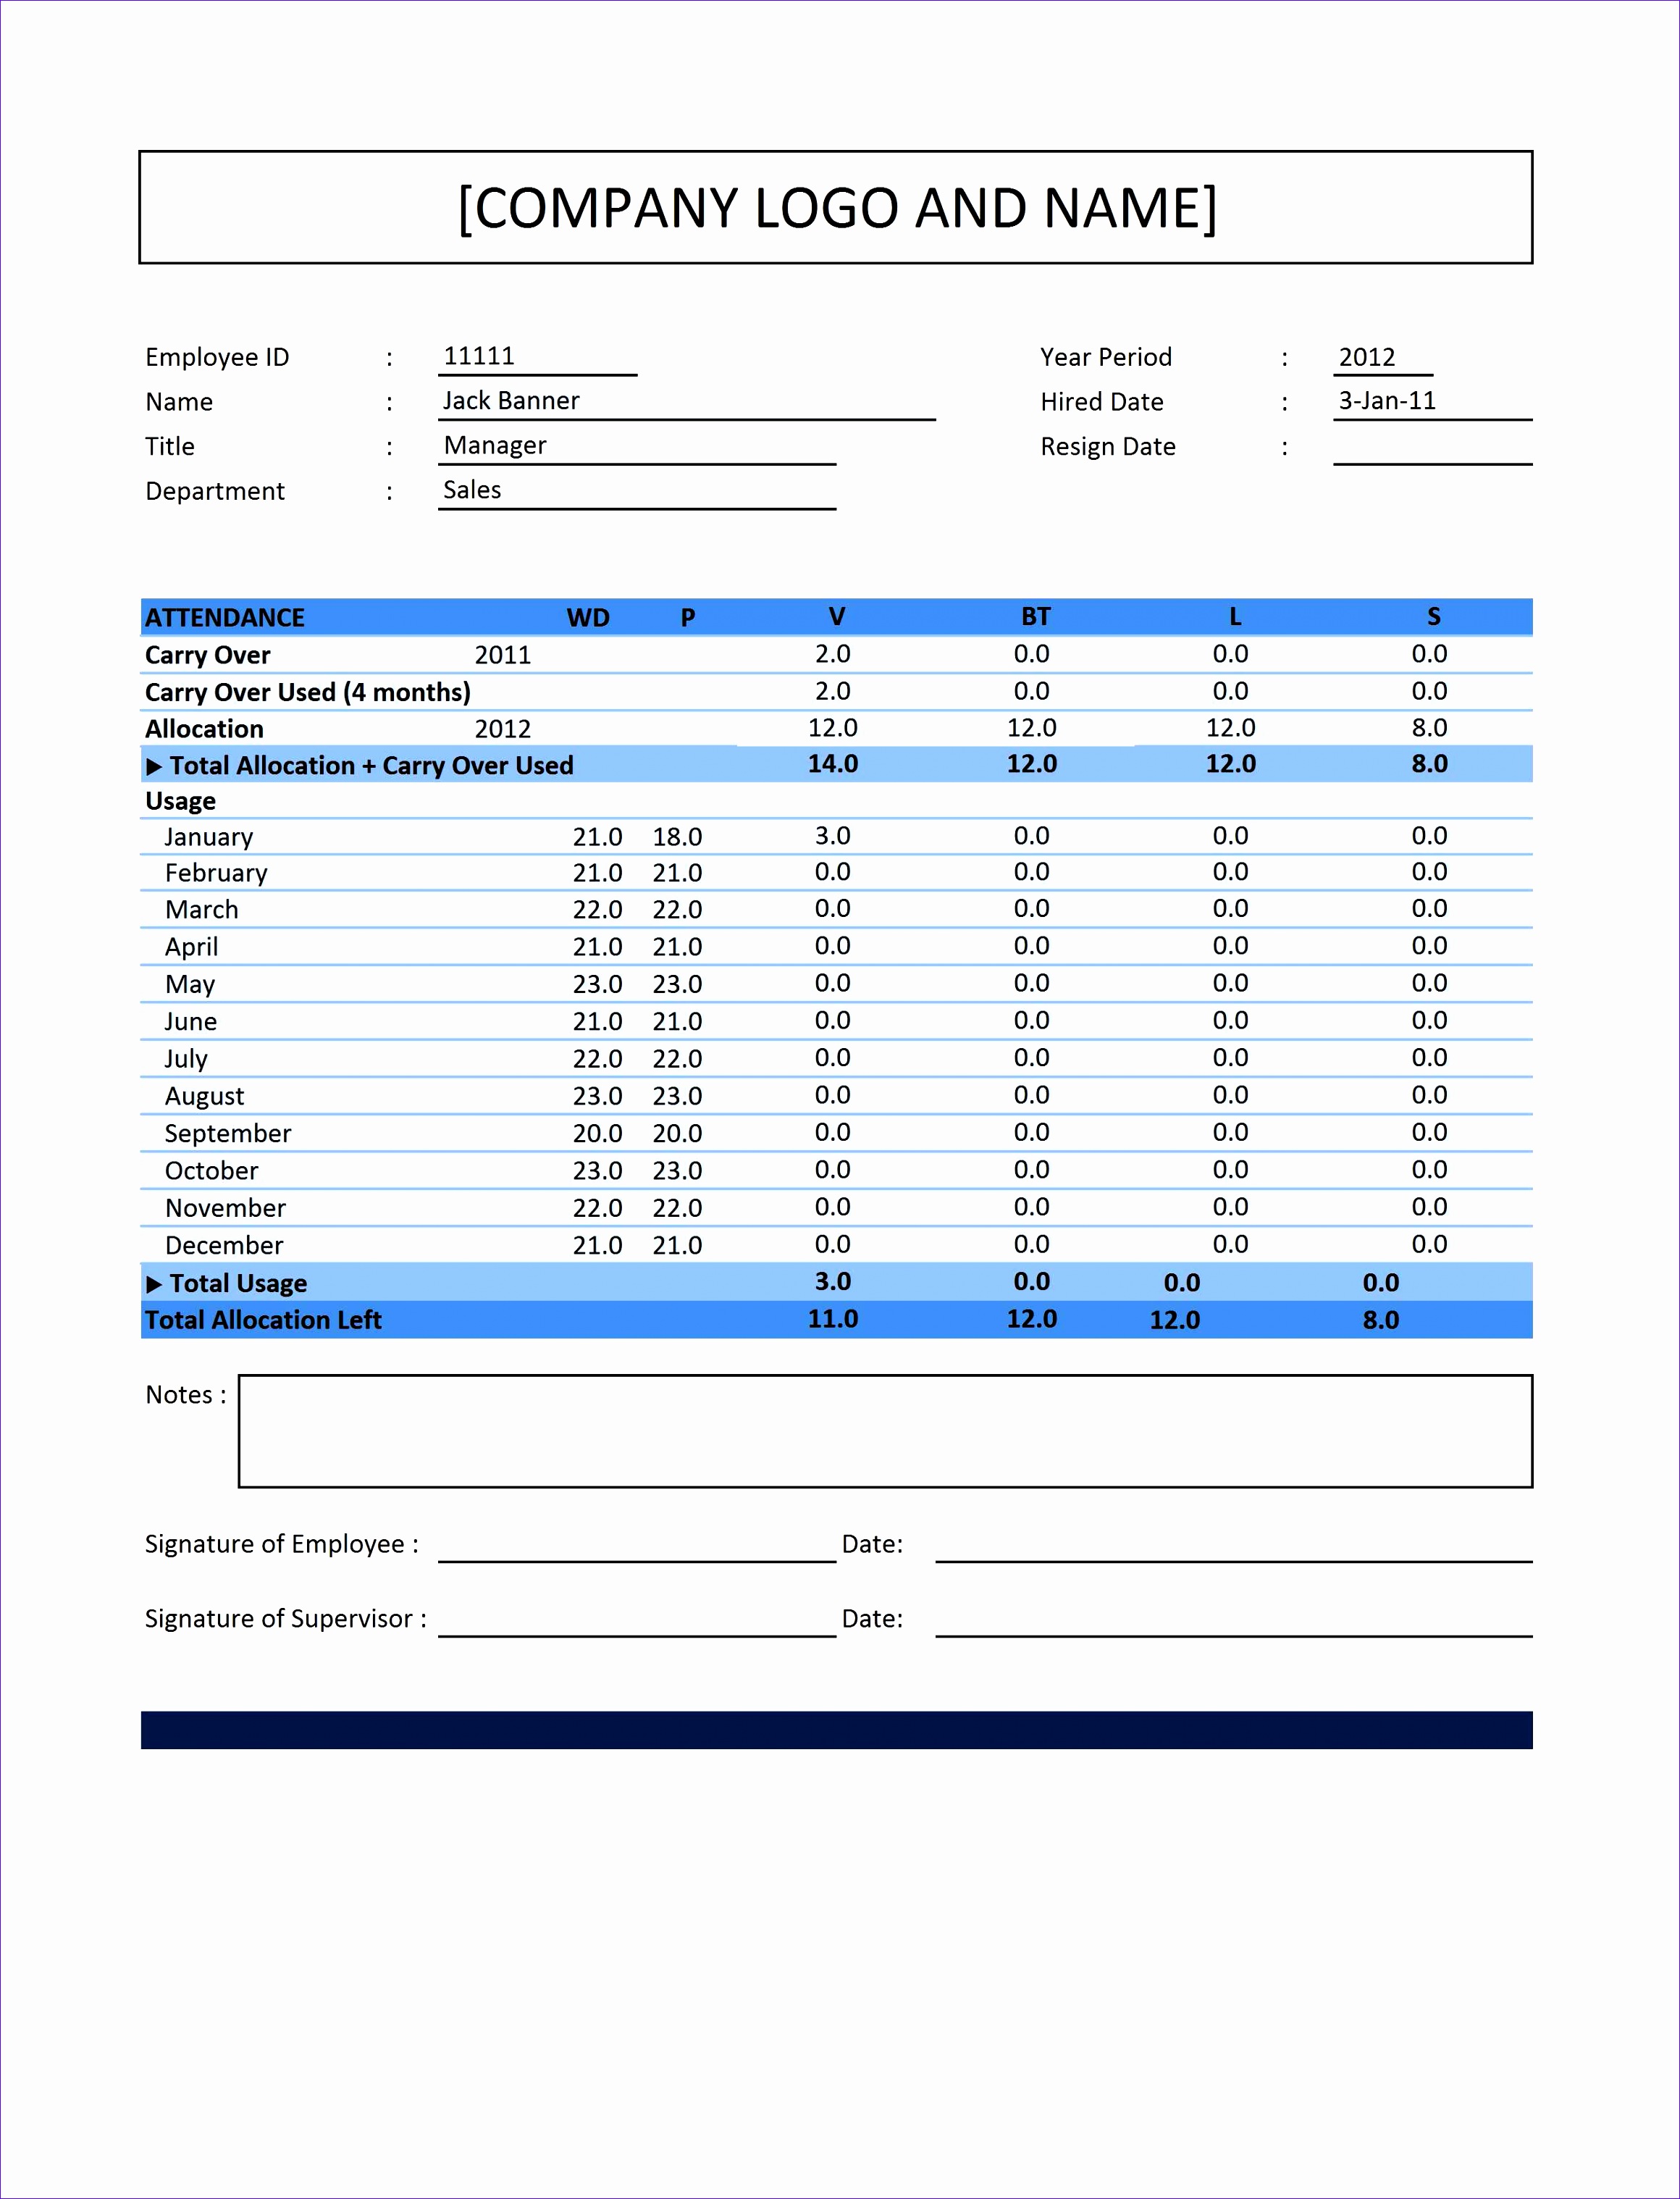 attendance sheets nice sample of employee attendance sheet template with blue table color and blank notes and signatures